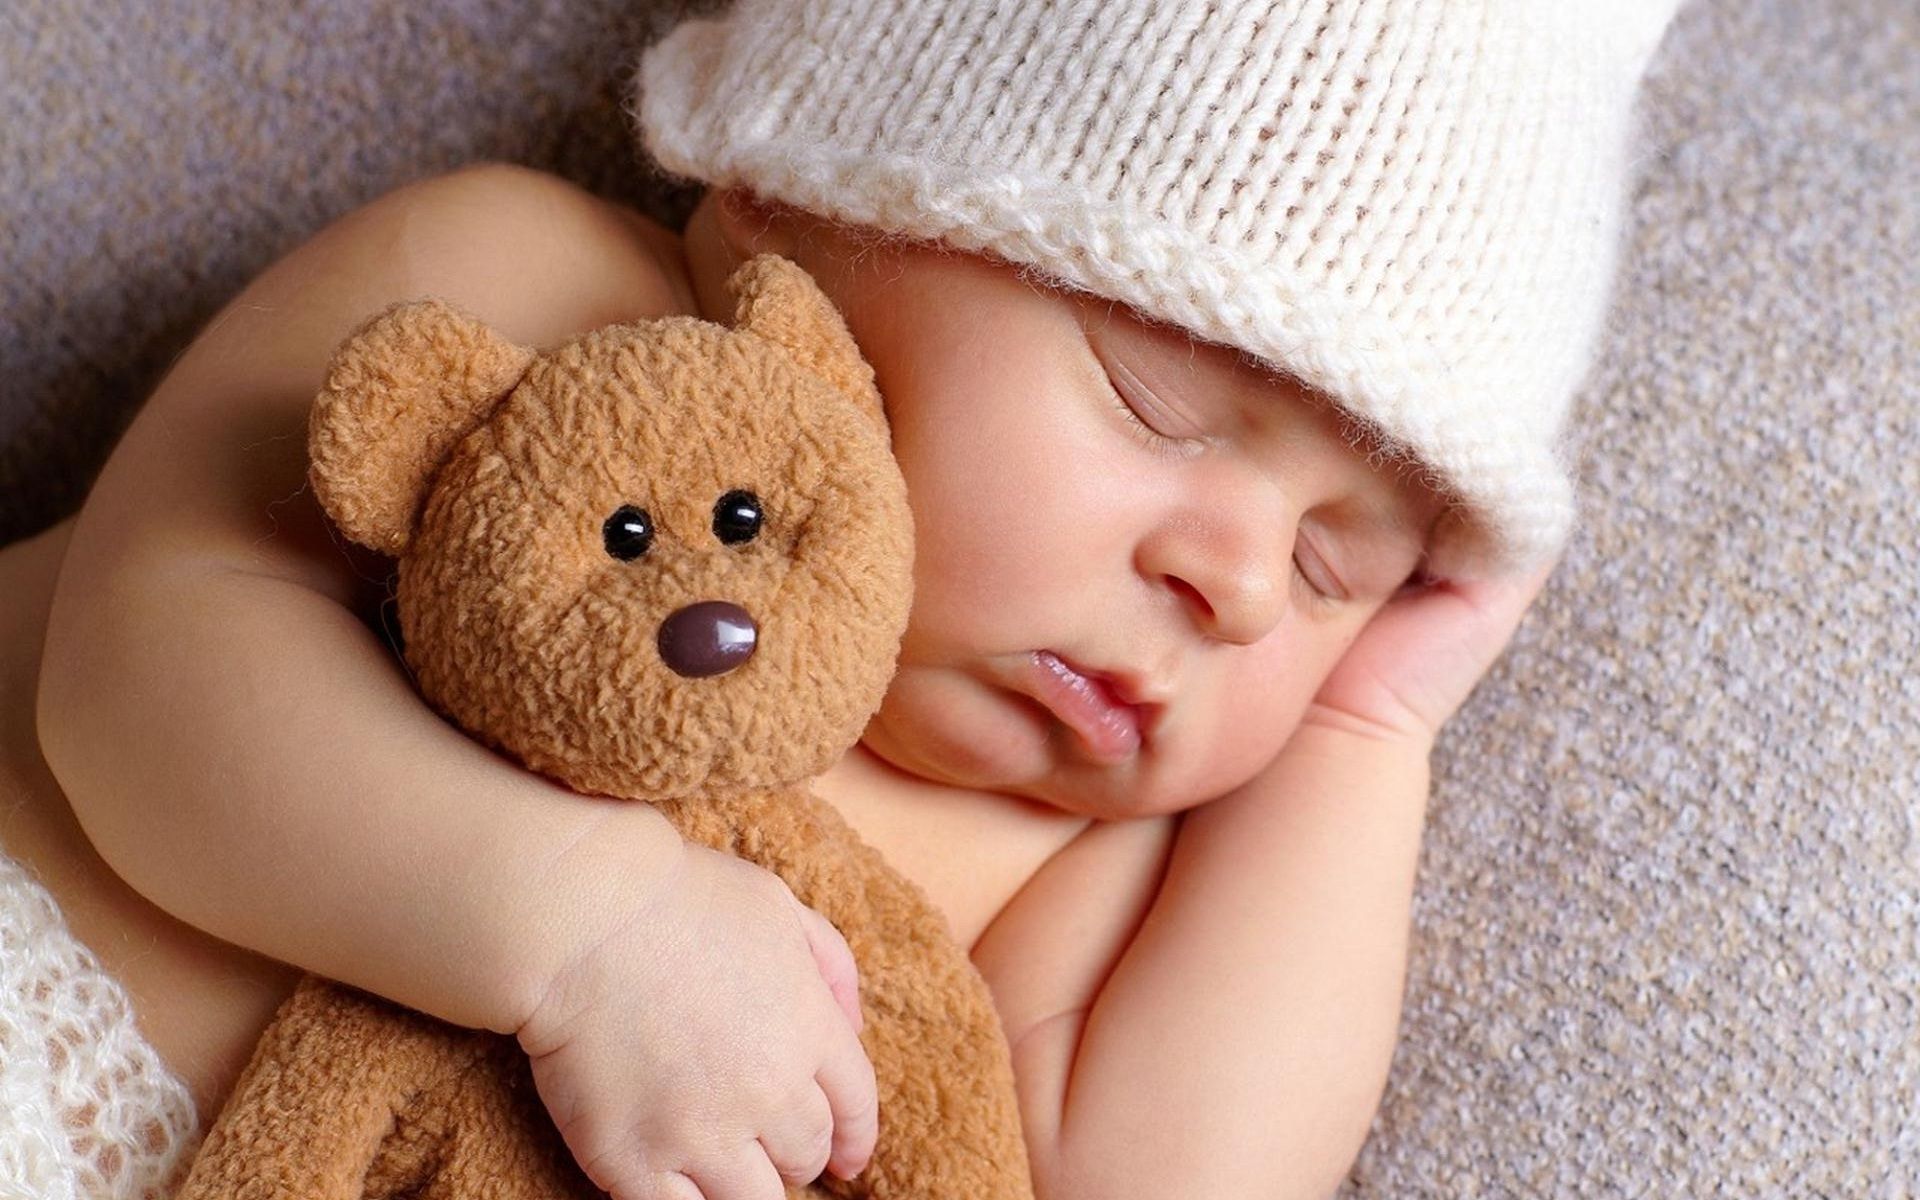 Sweet Dreams Wallpapers Group - Baby With Teddy Bear - HD Wallpaper 